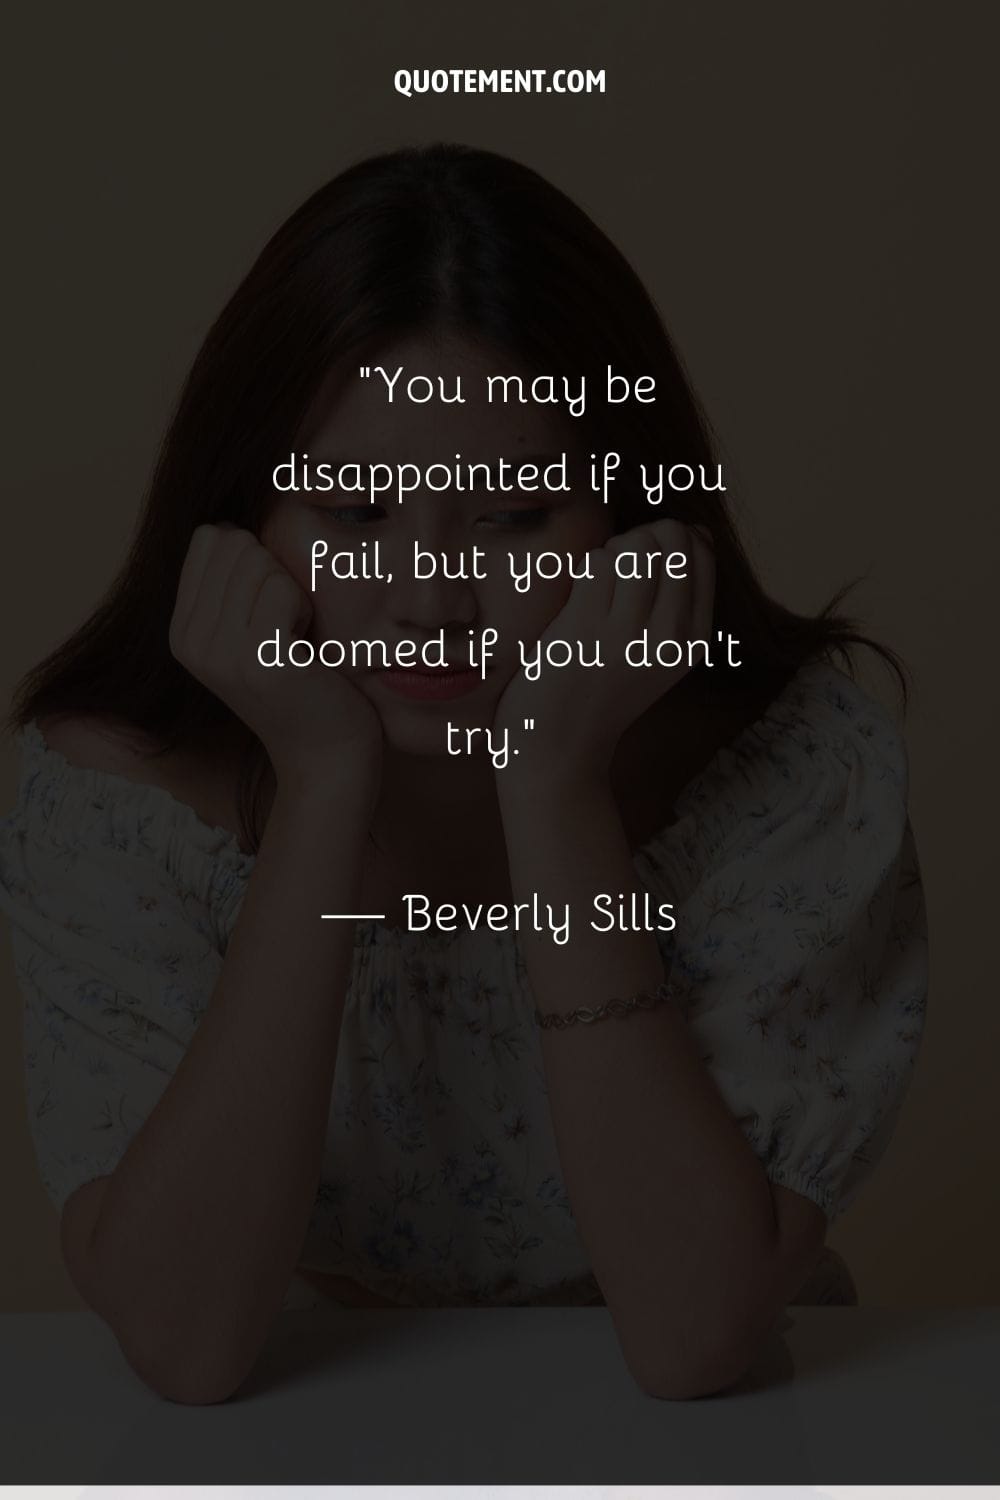 You may be disappointed if you fail, but you are doomed if you don’t try